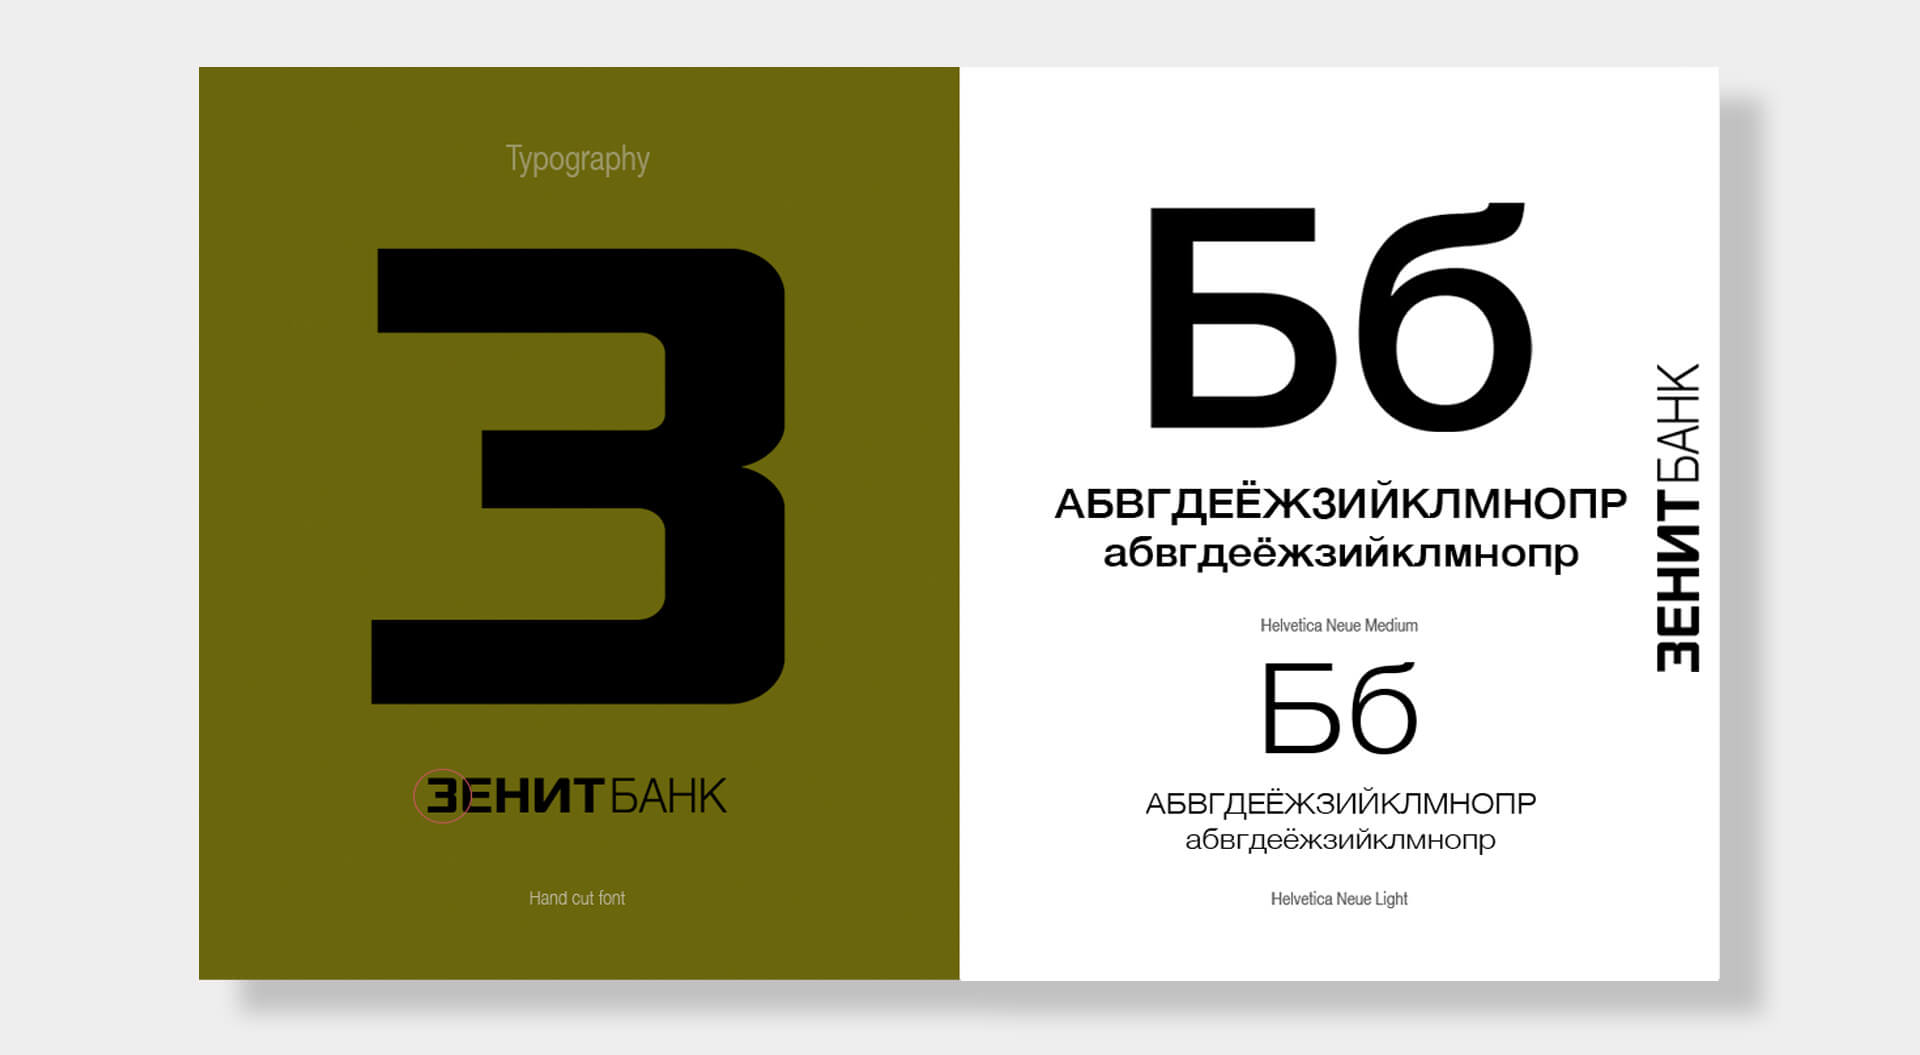 Zenit Bank Russia, Brand Typography, Graphic Communications for the Brand Manual - CampbellRigg Agency